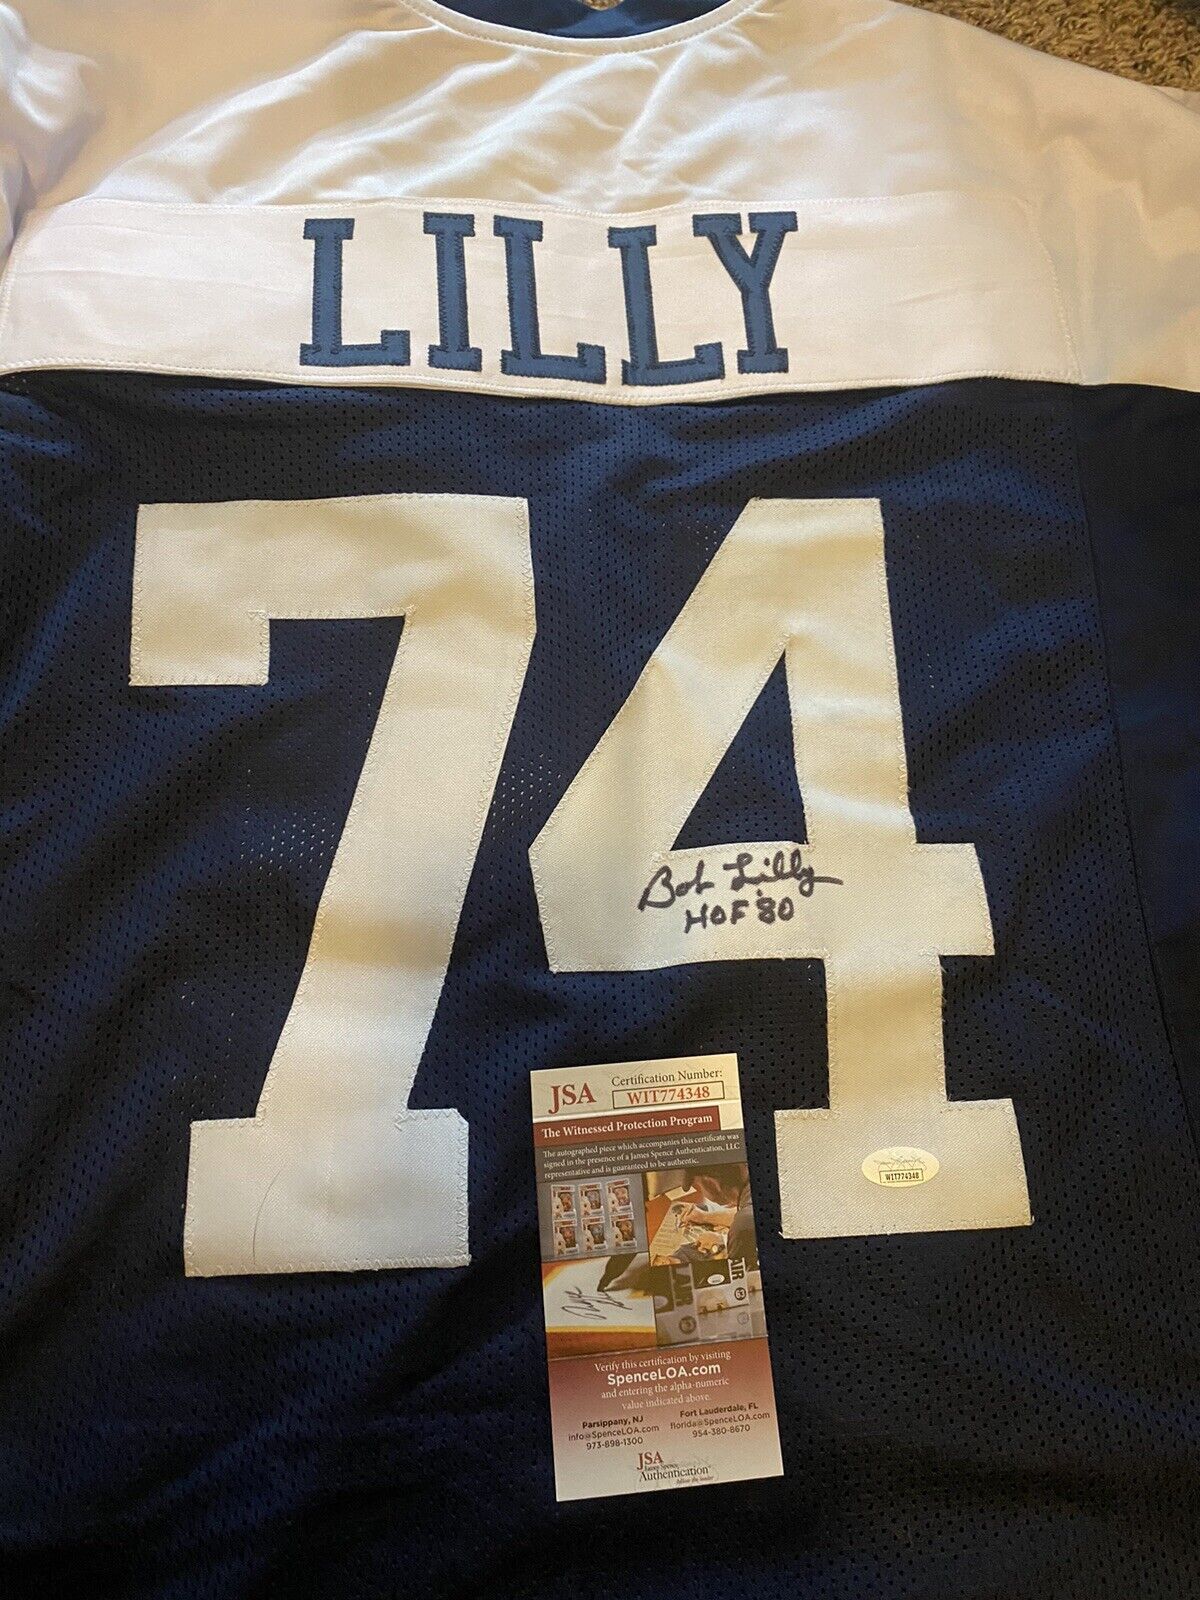 Bob Lilly Autographed Dallas Cowboys Jersey With “hof 80” Inscribed COA included